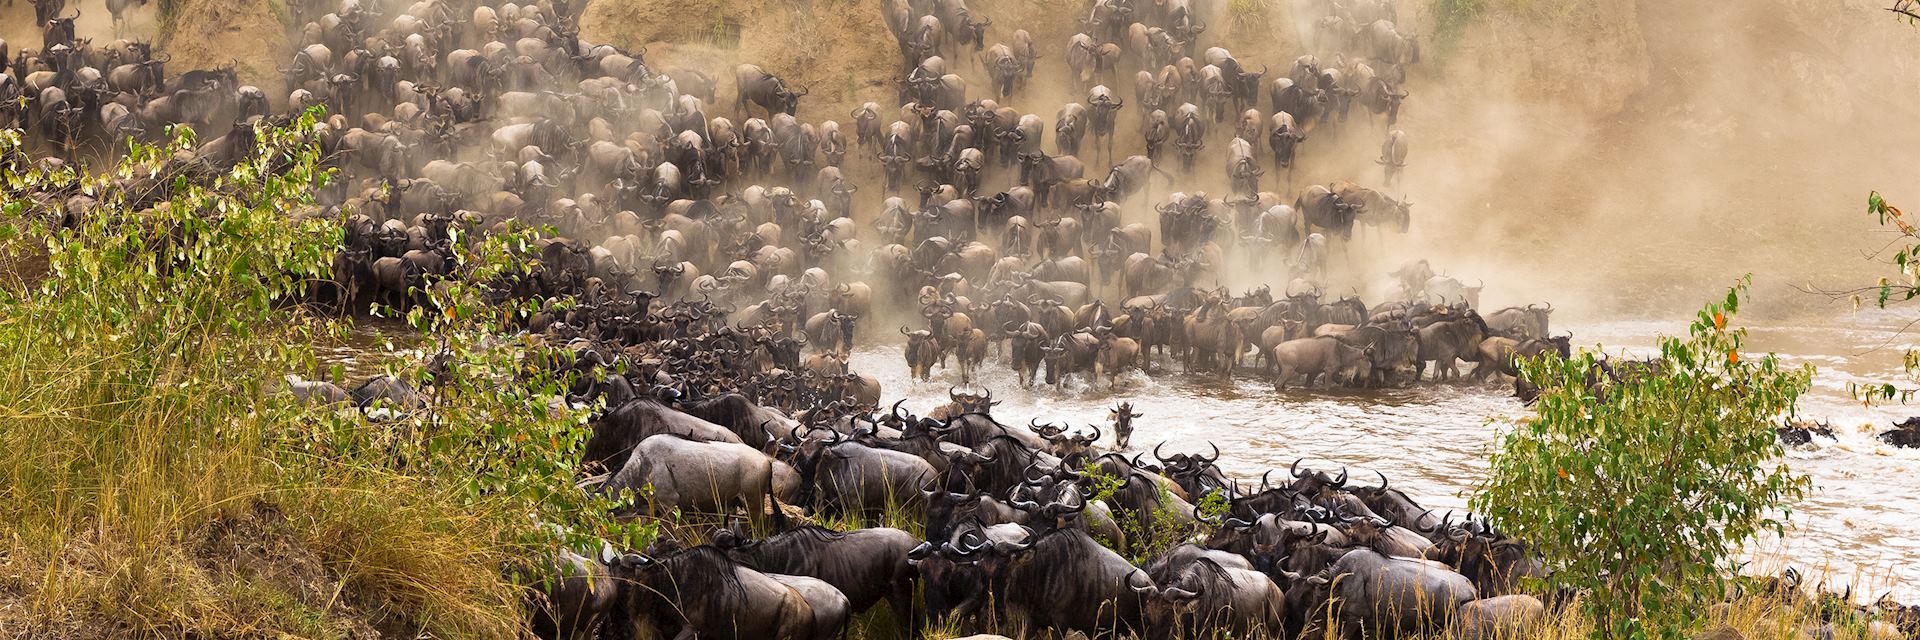 Wildebeest river crossing during the Great Migration, Kenya